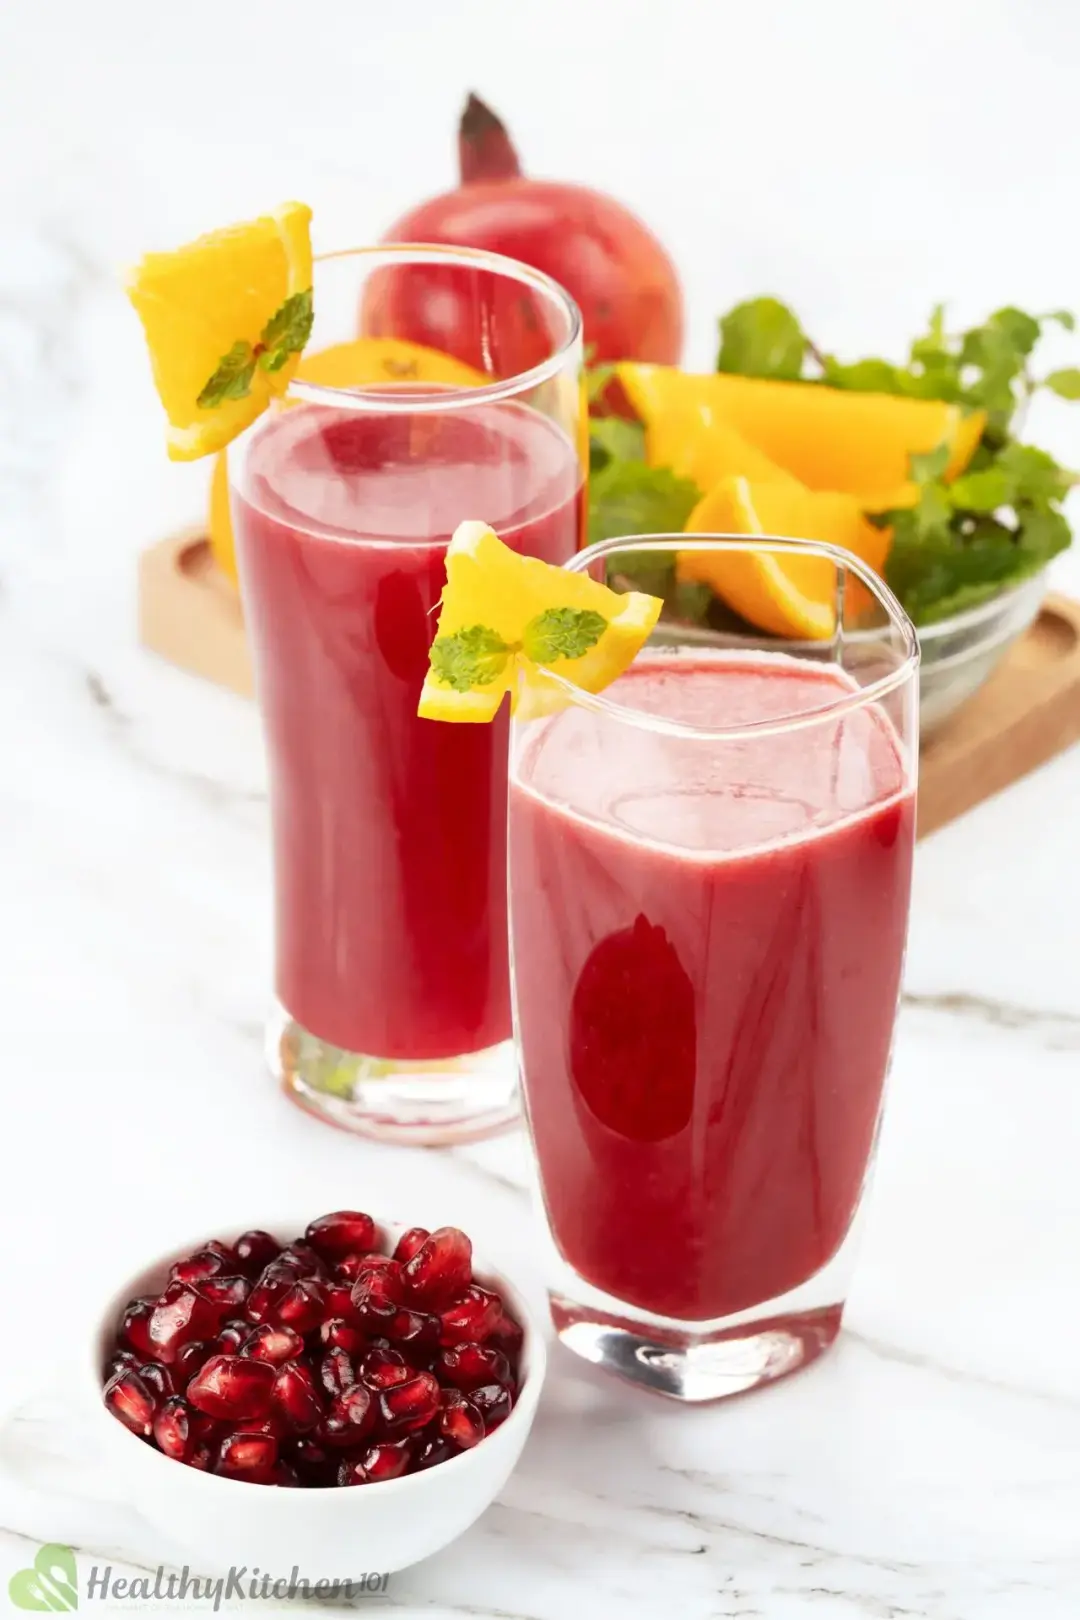 Two glasses of orange pomegranate juice garnished with orange wedges and put next to a bowl of pomegranate gems